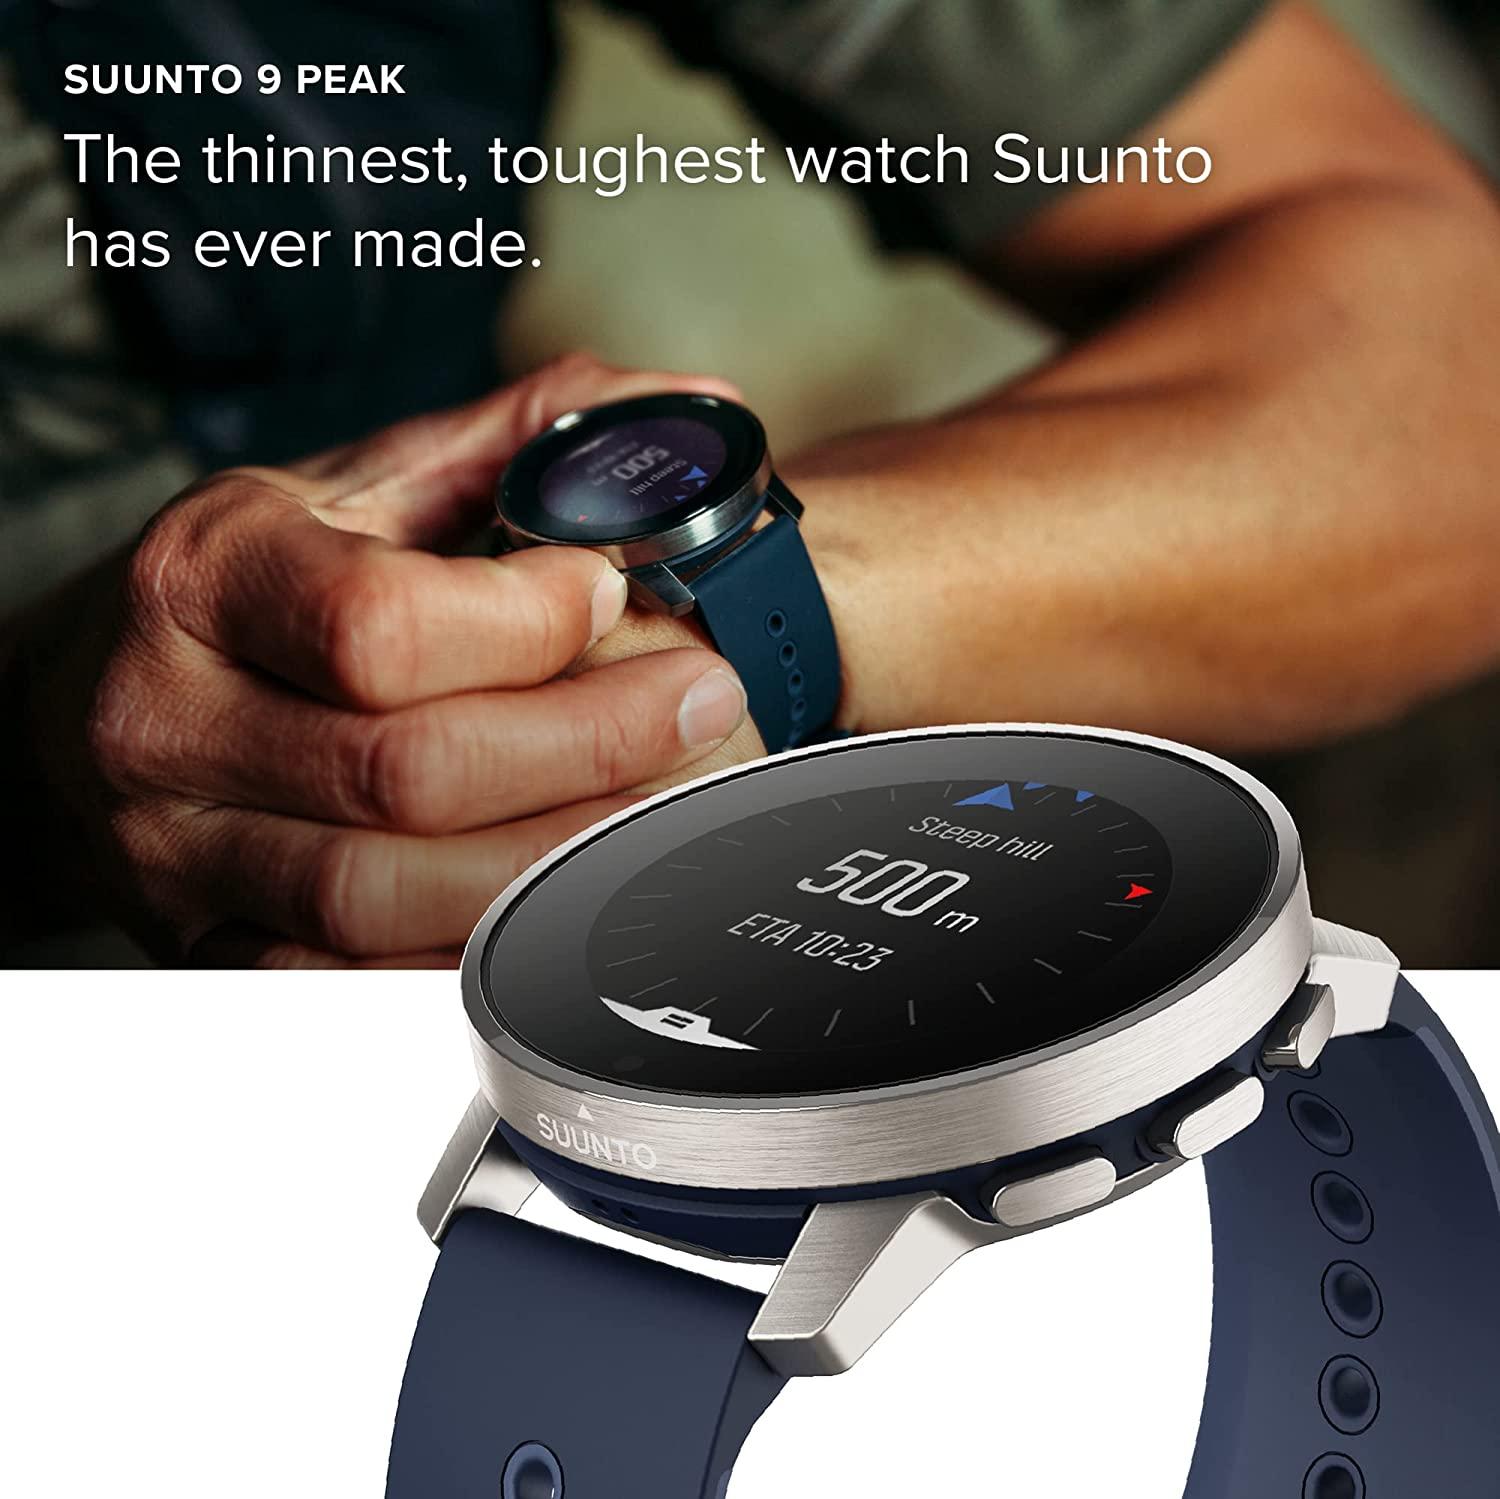 SUUNTO 9 Peak: Premium Running, Cycling, Adventure Watch with Route Navigation, Compact 43mm Size Touch Screen, up to 170 Hours GPS Battery Life Titanium Granite Blue